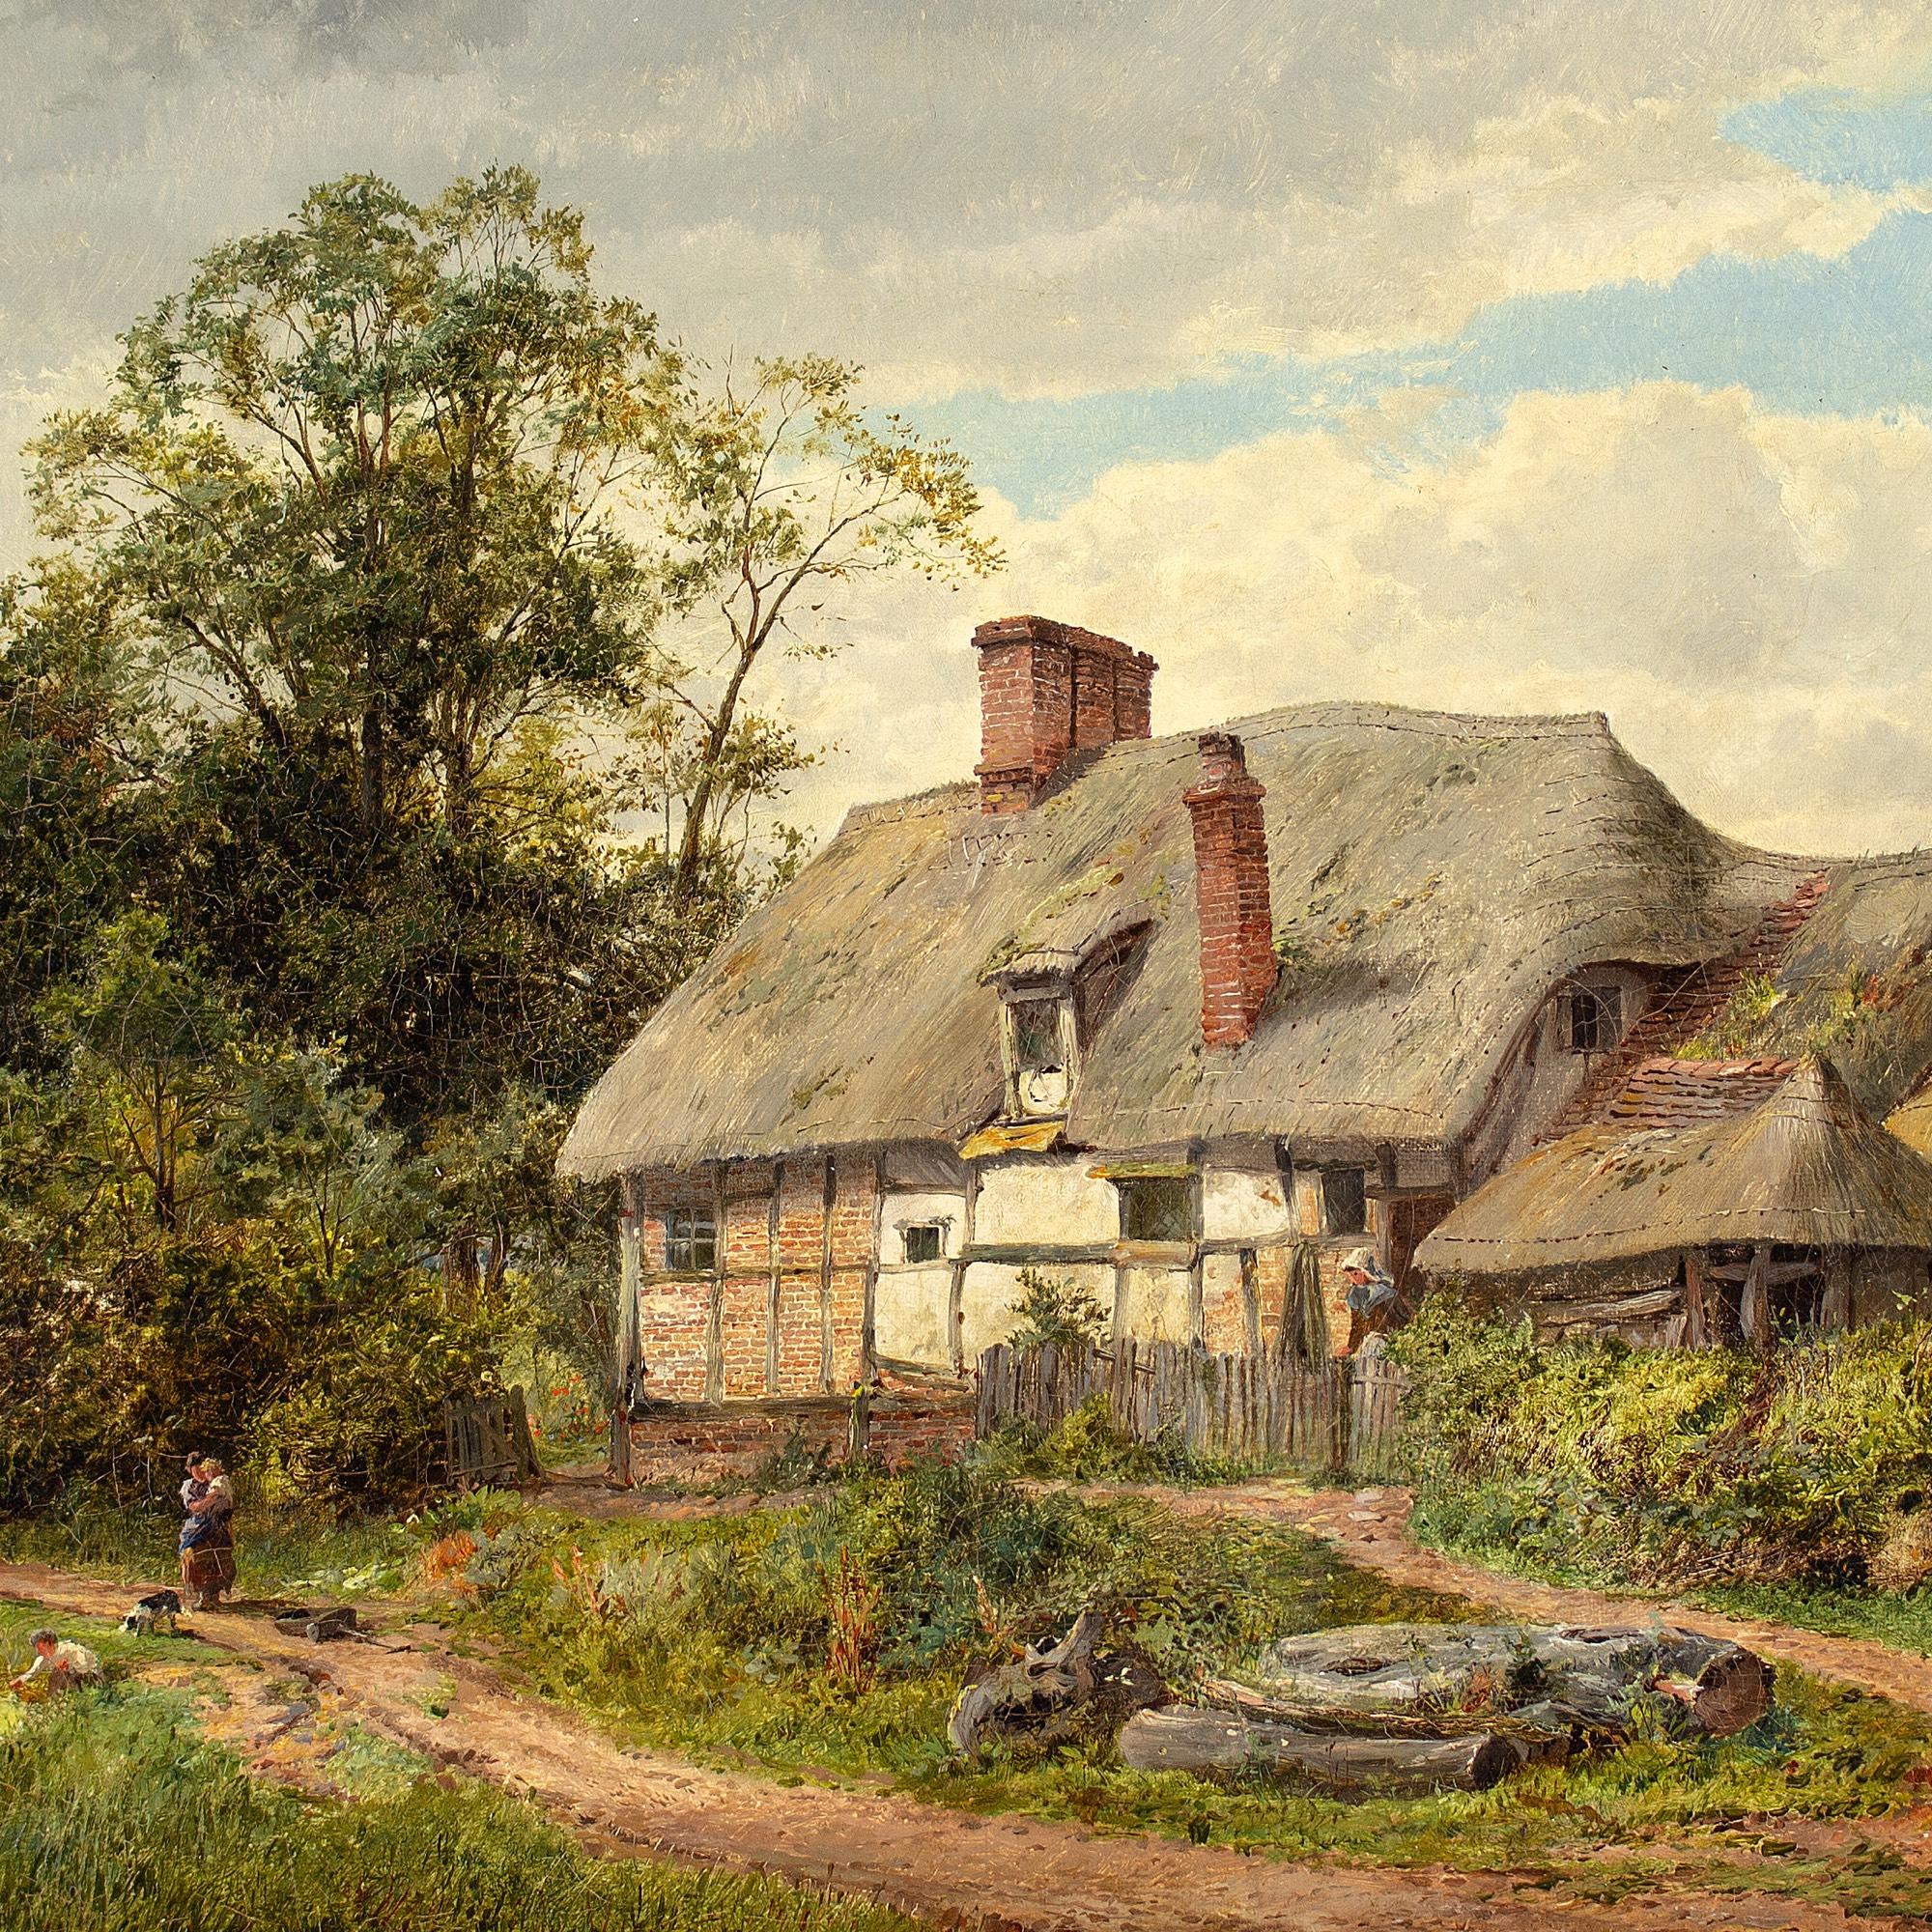 This charming 19th-century oil painting by British artist David Bates (1840-1921) depicts an idyllic rural scene with a picturesque thatched cottage, country track, pond and figures.

Beaming under the incandescence of Summer, a charming